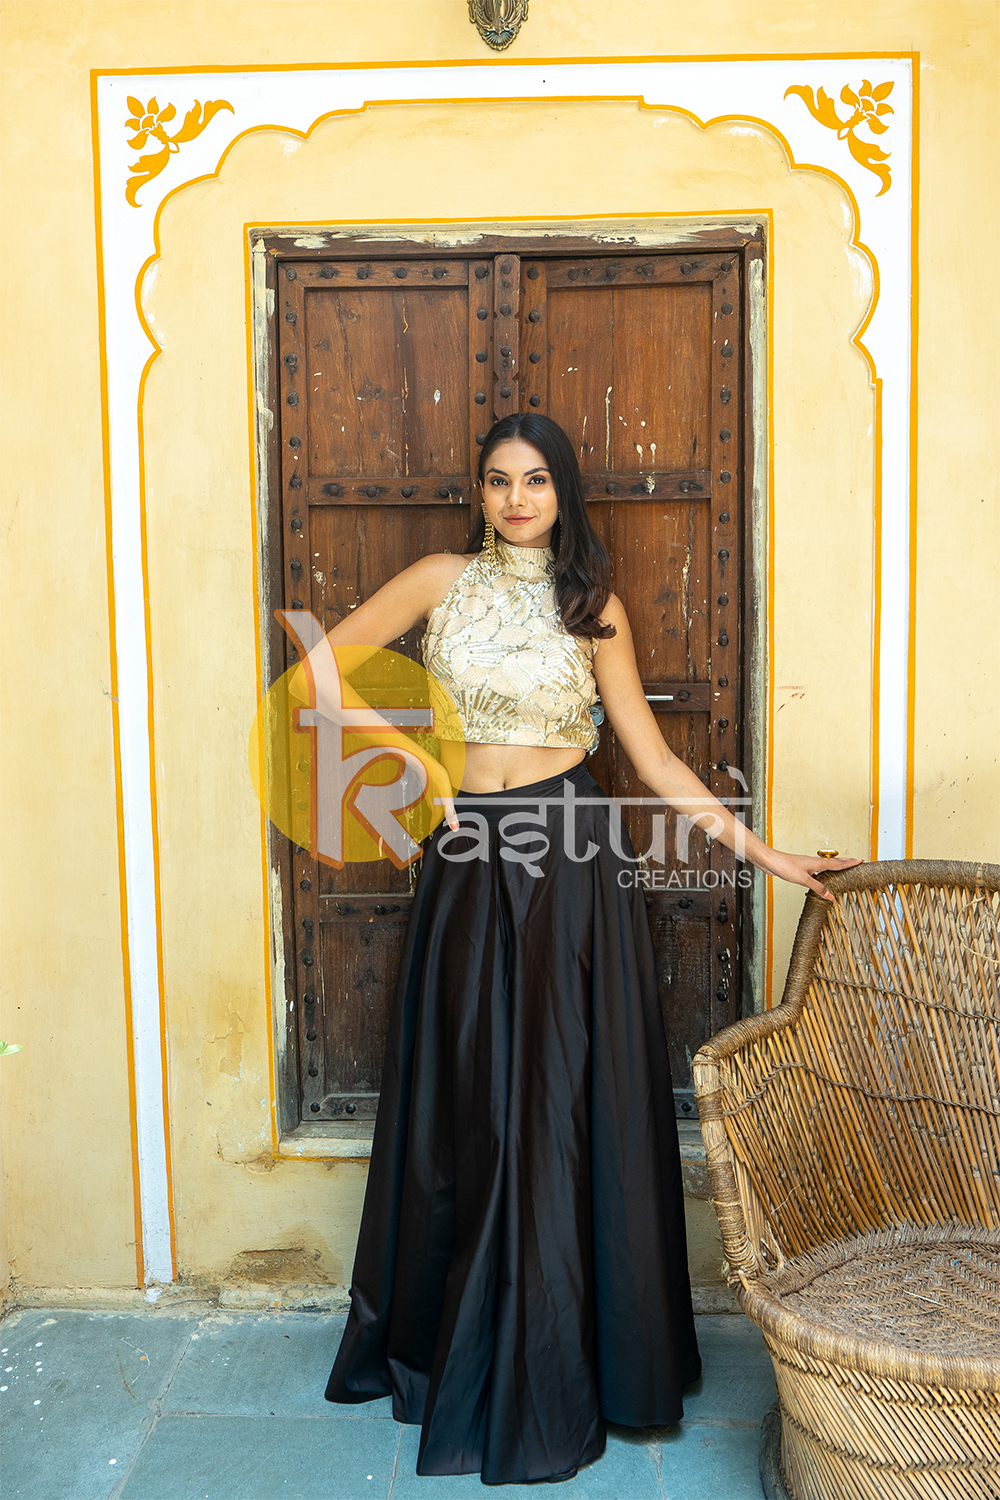 Choco brown and cream embroidered georgette top with skirt in silk